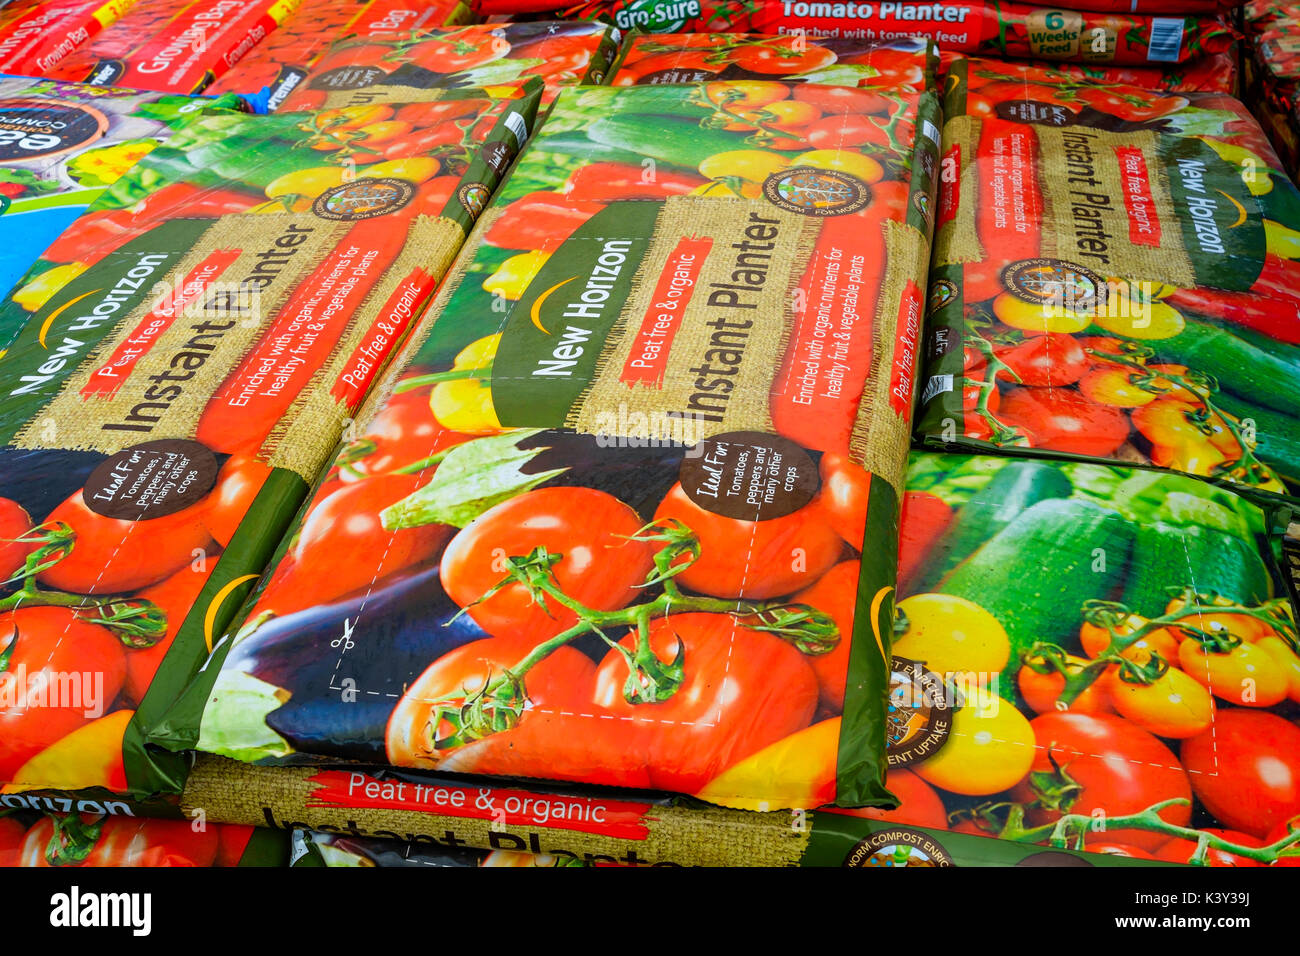 A stack of extra large New Horizon Instant Planter  grow bags in a garden centre used for growing tomato plants peppersor other similar plants Stock Photo